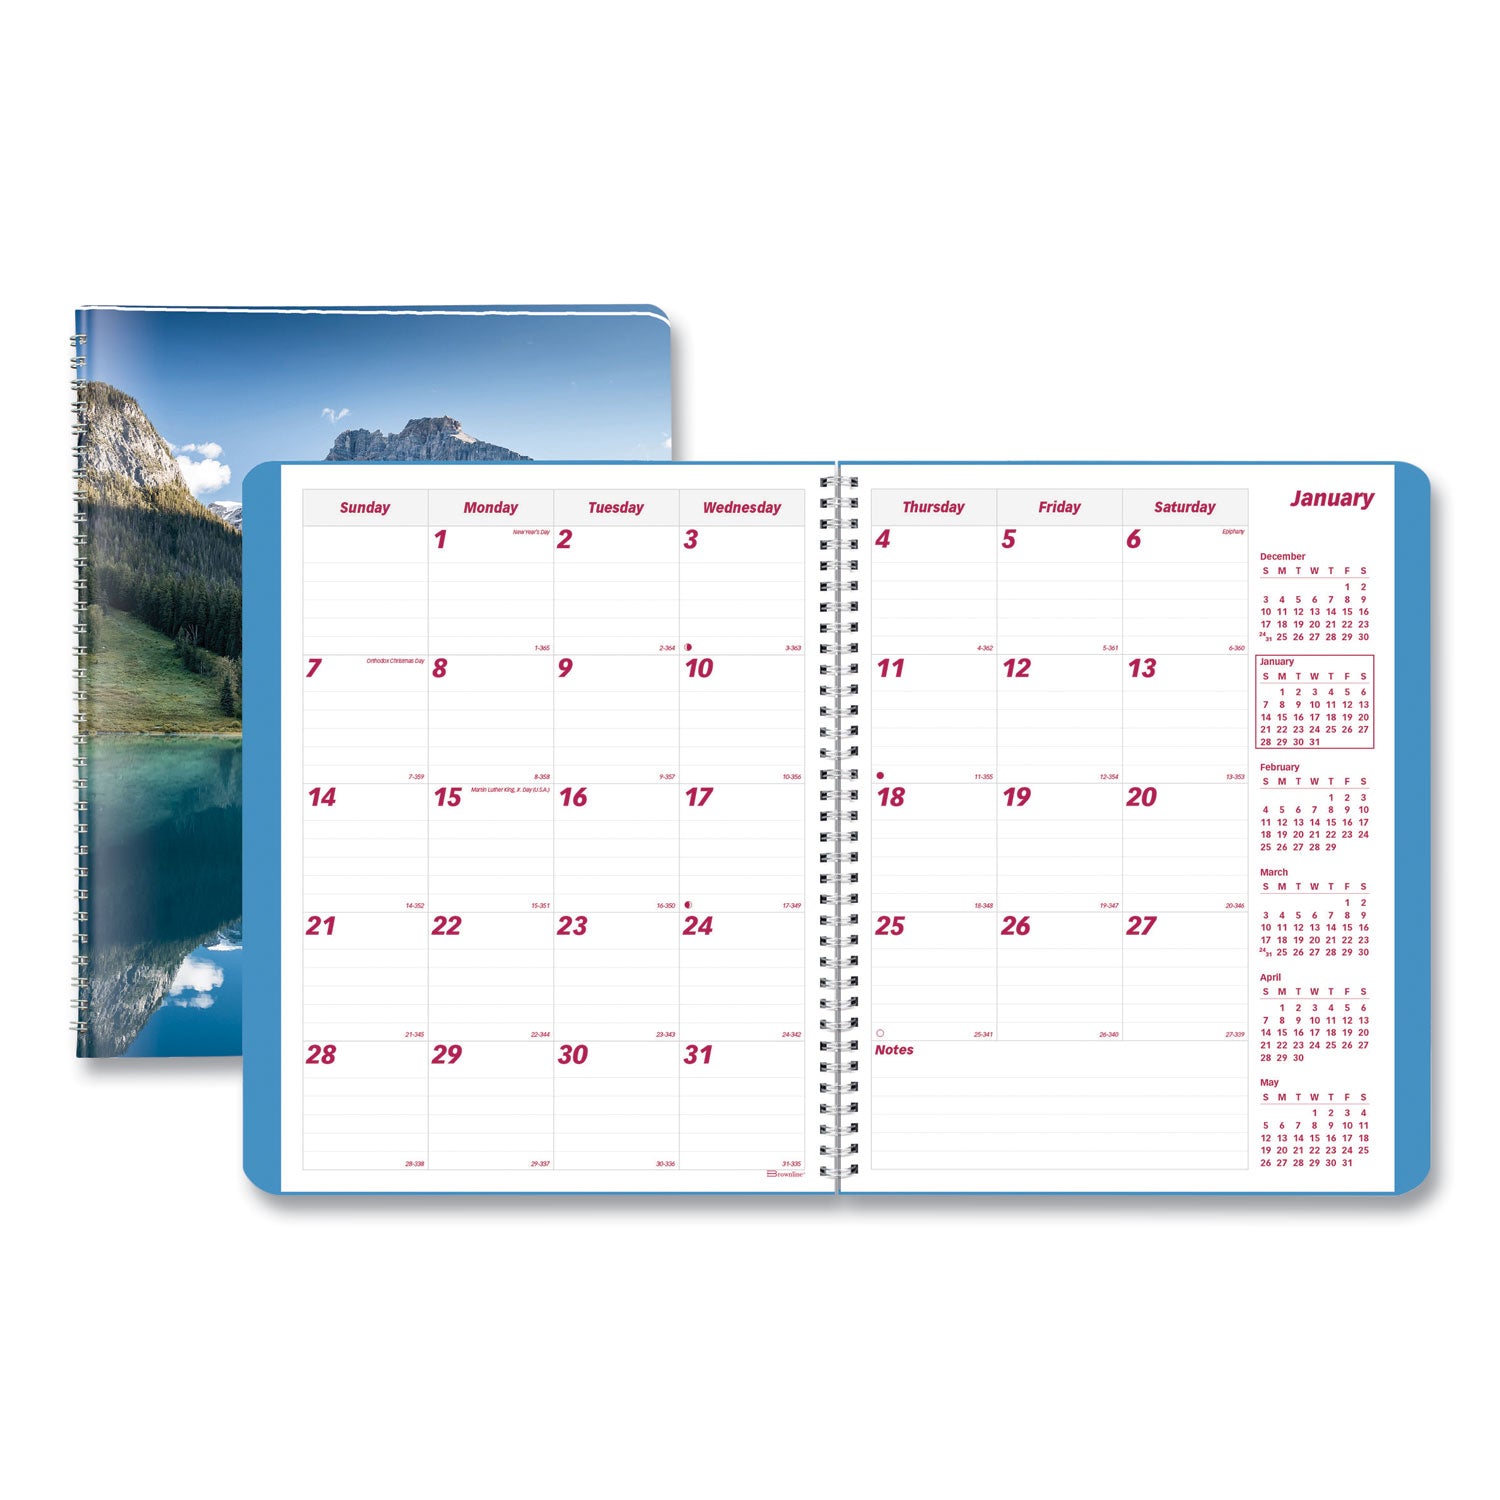 mountains-14-month-planner-mountains-photography-11-x-85-blue-green-cover-14-month-dec-to-jan-2023-to-2025_redcb1262g04 - 1